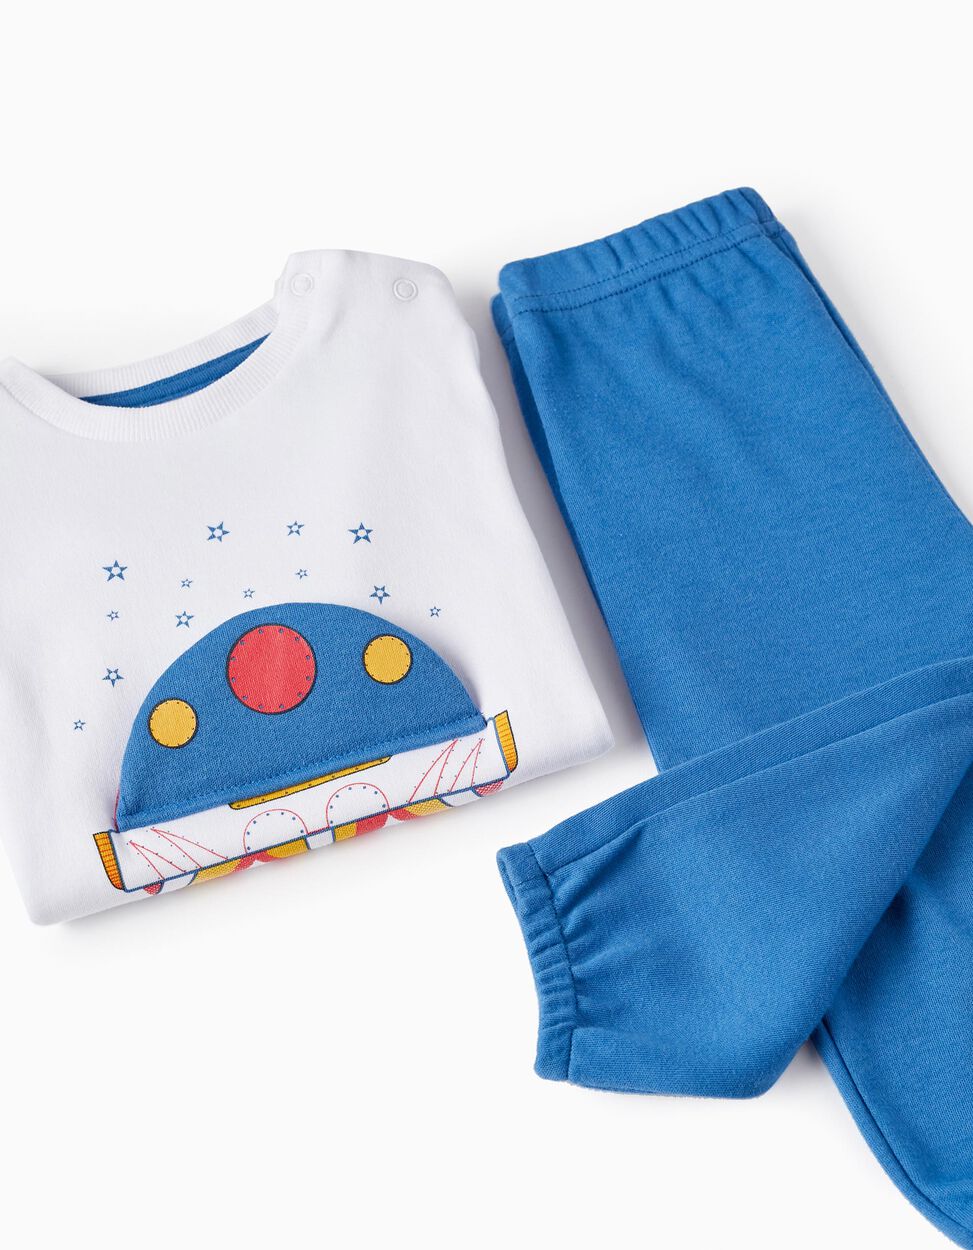 Buy Online Cotton Pyjamas with 3D Effect for Baby Boys 'Spaceship', White/Blue